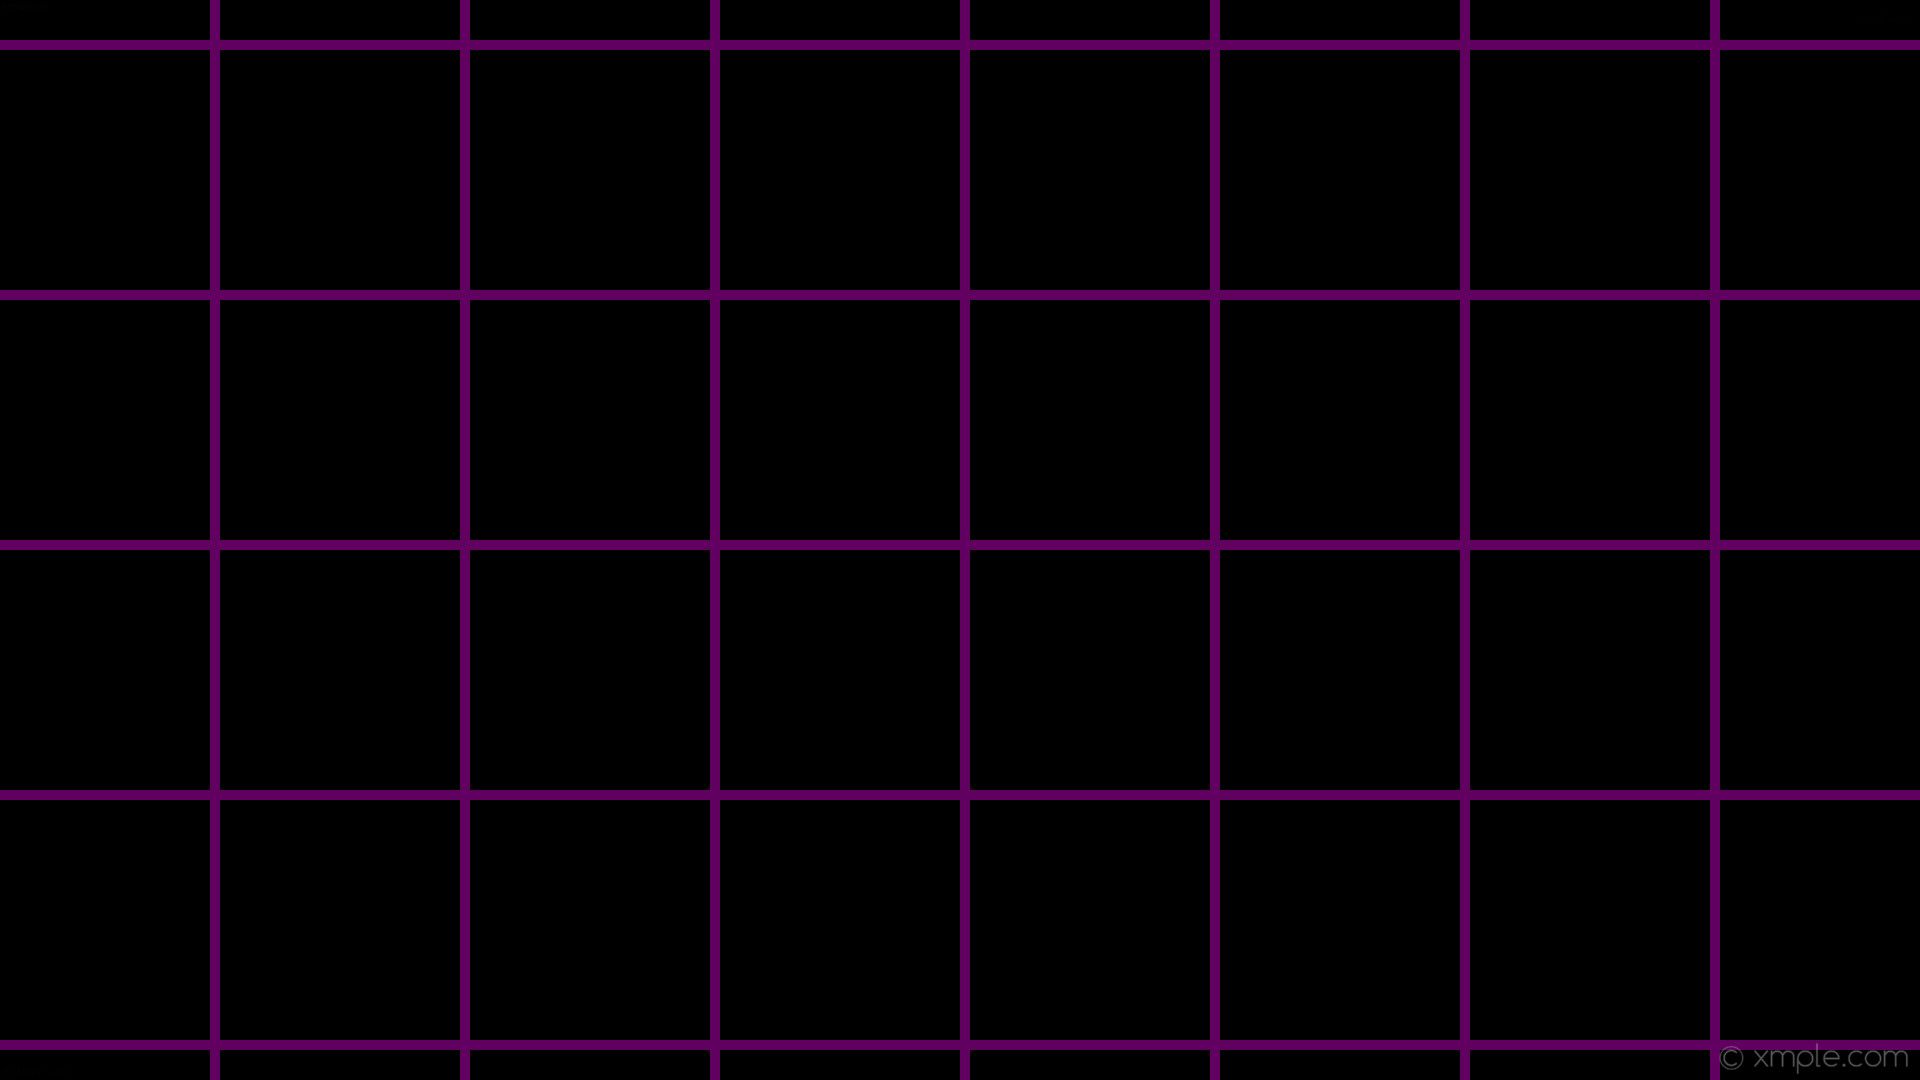 A black and purple grid with squares - Magenta